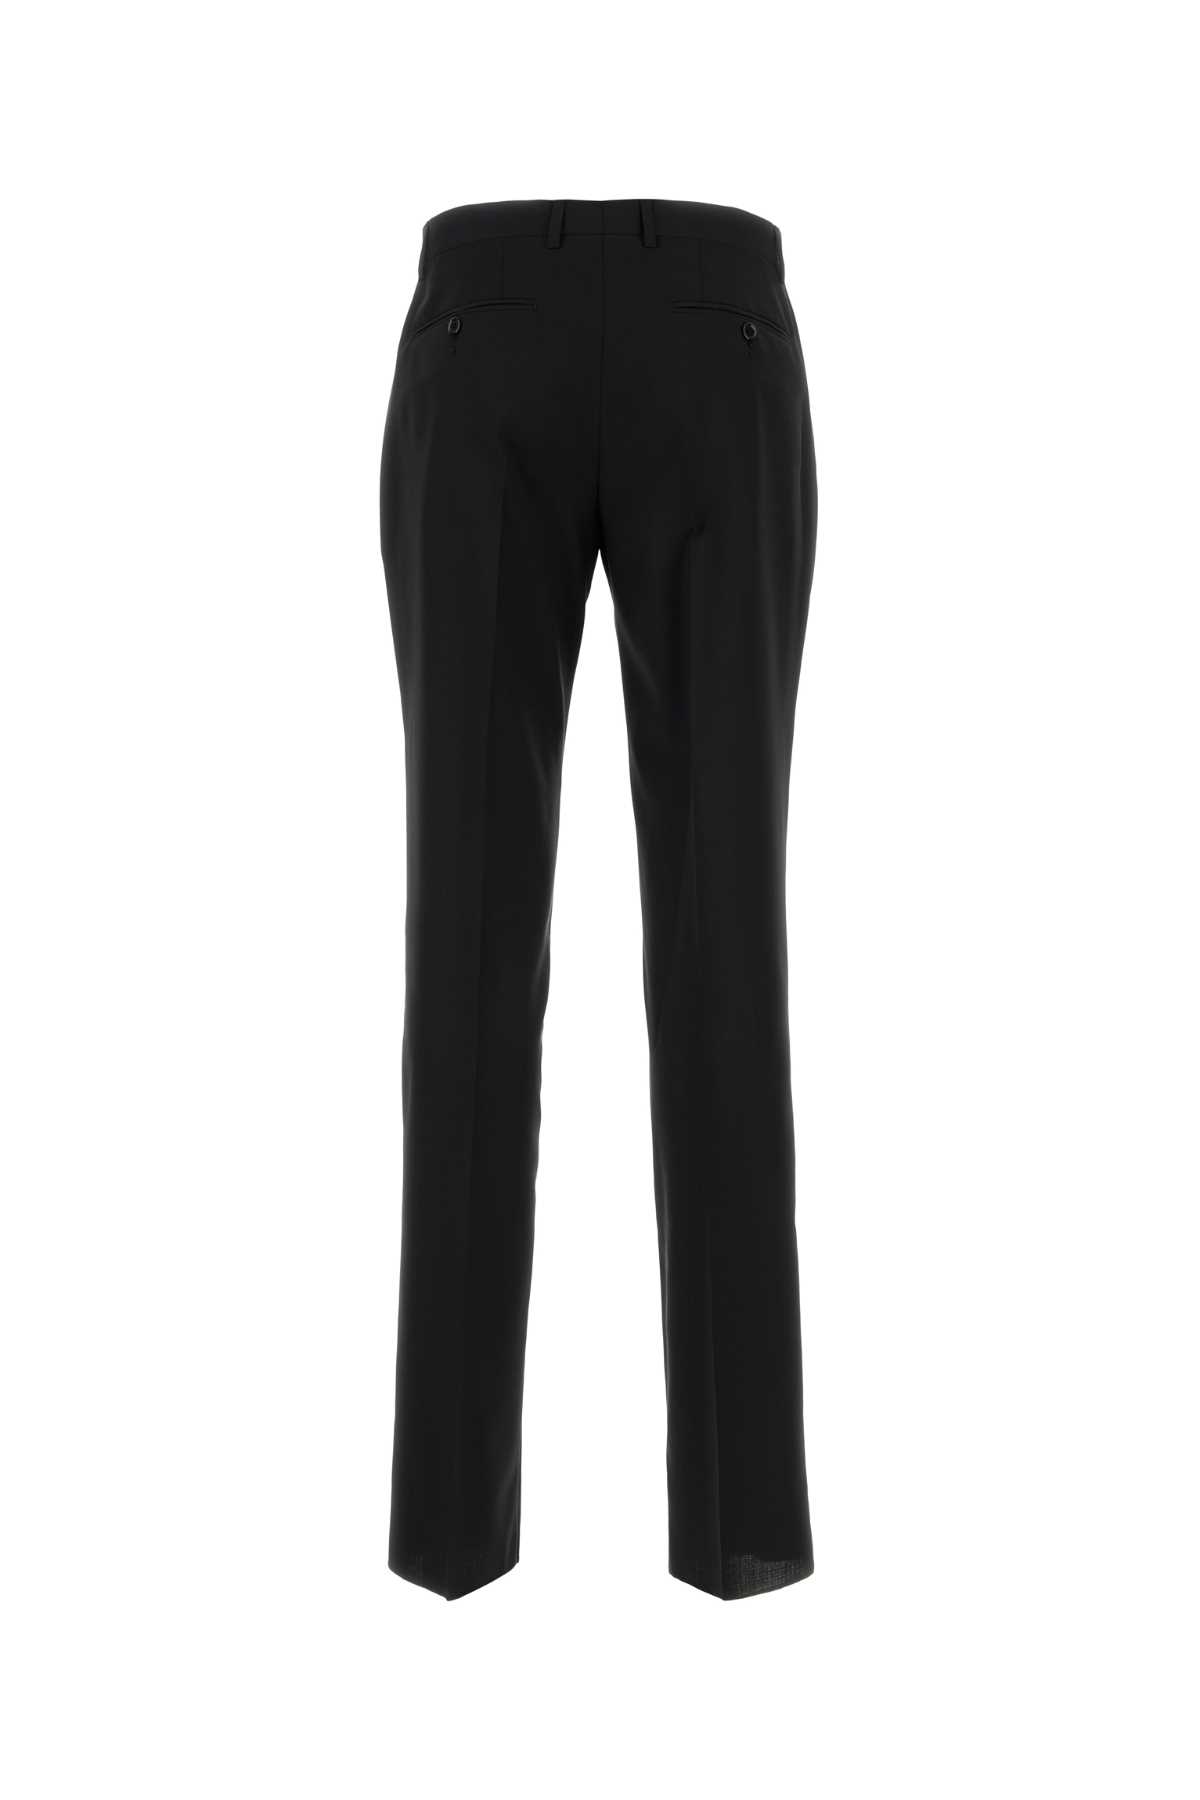 Moschino Black Wool Trouser In 0555